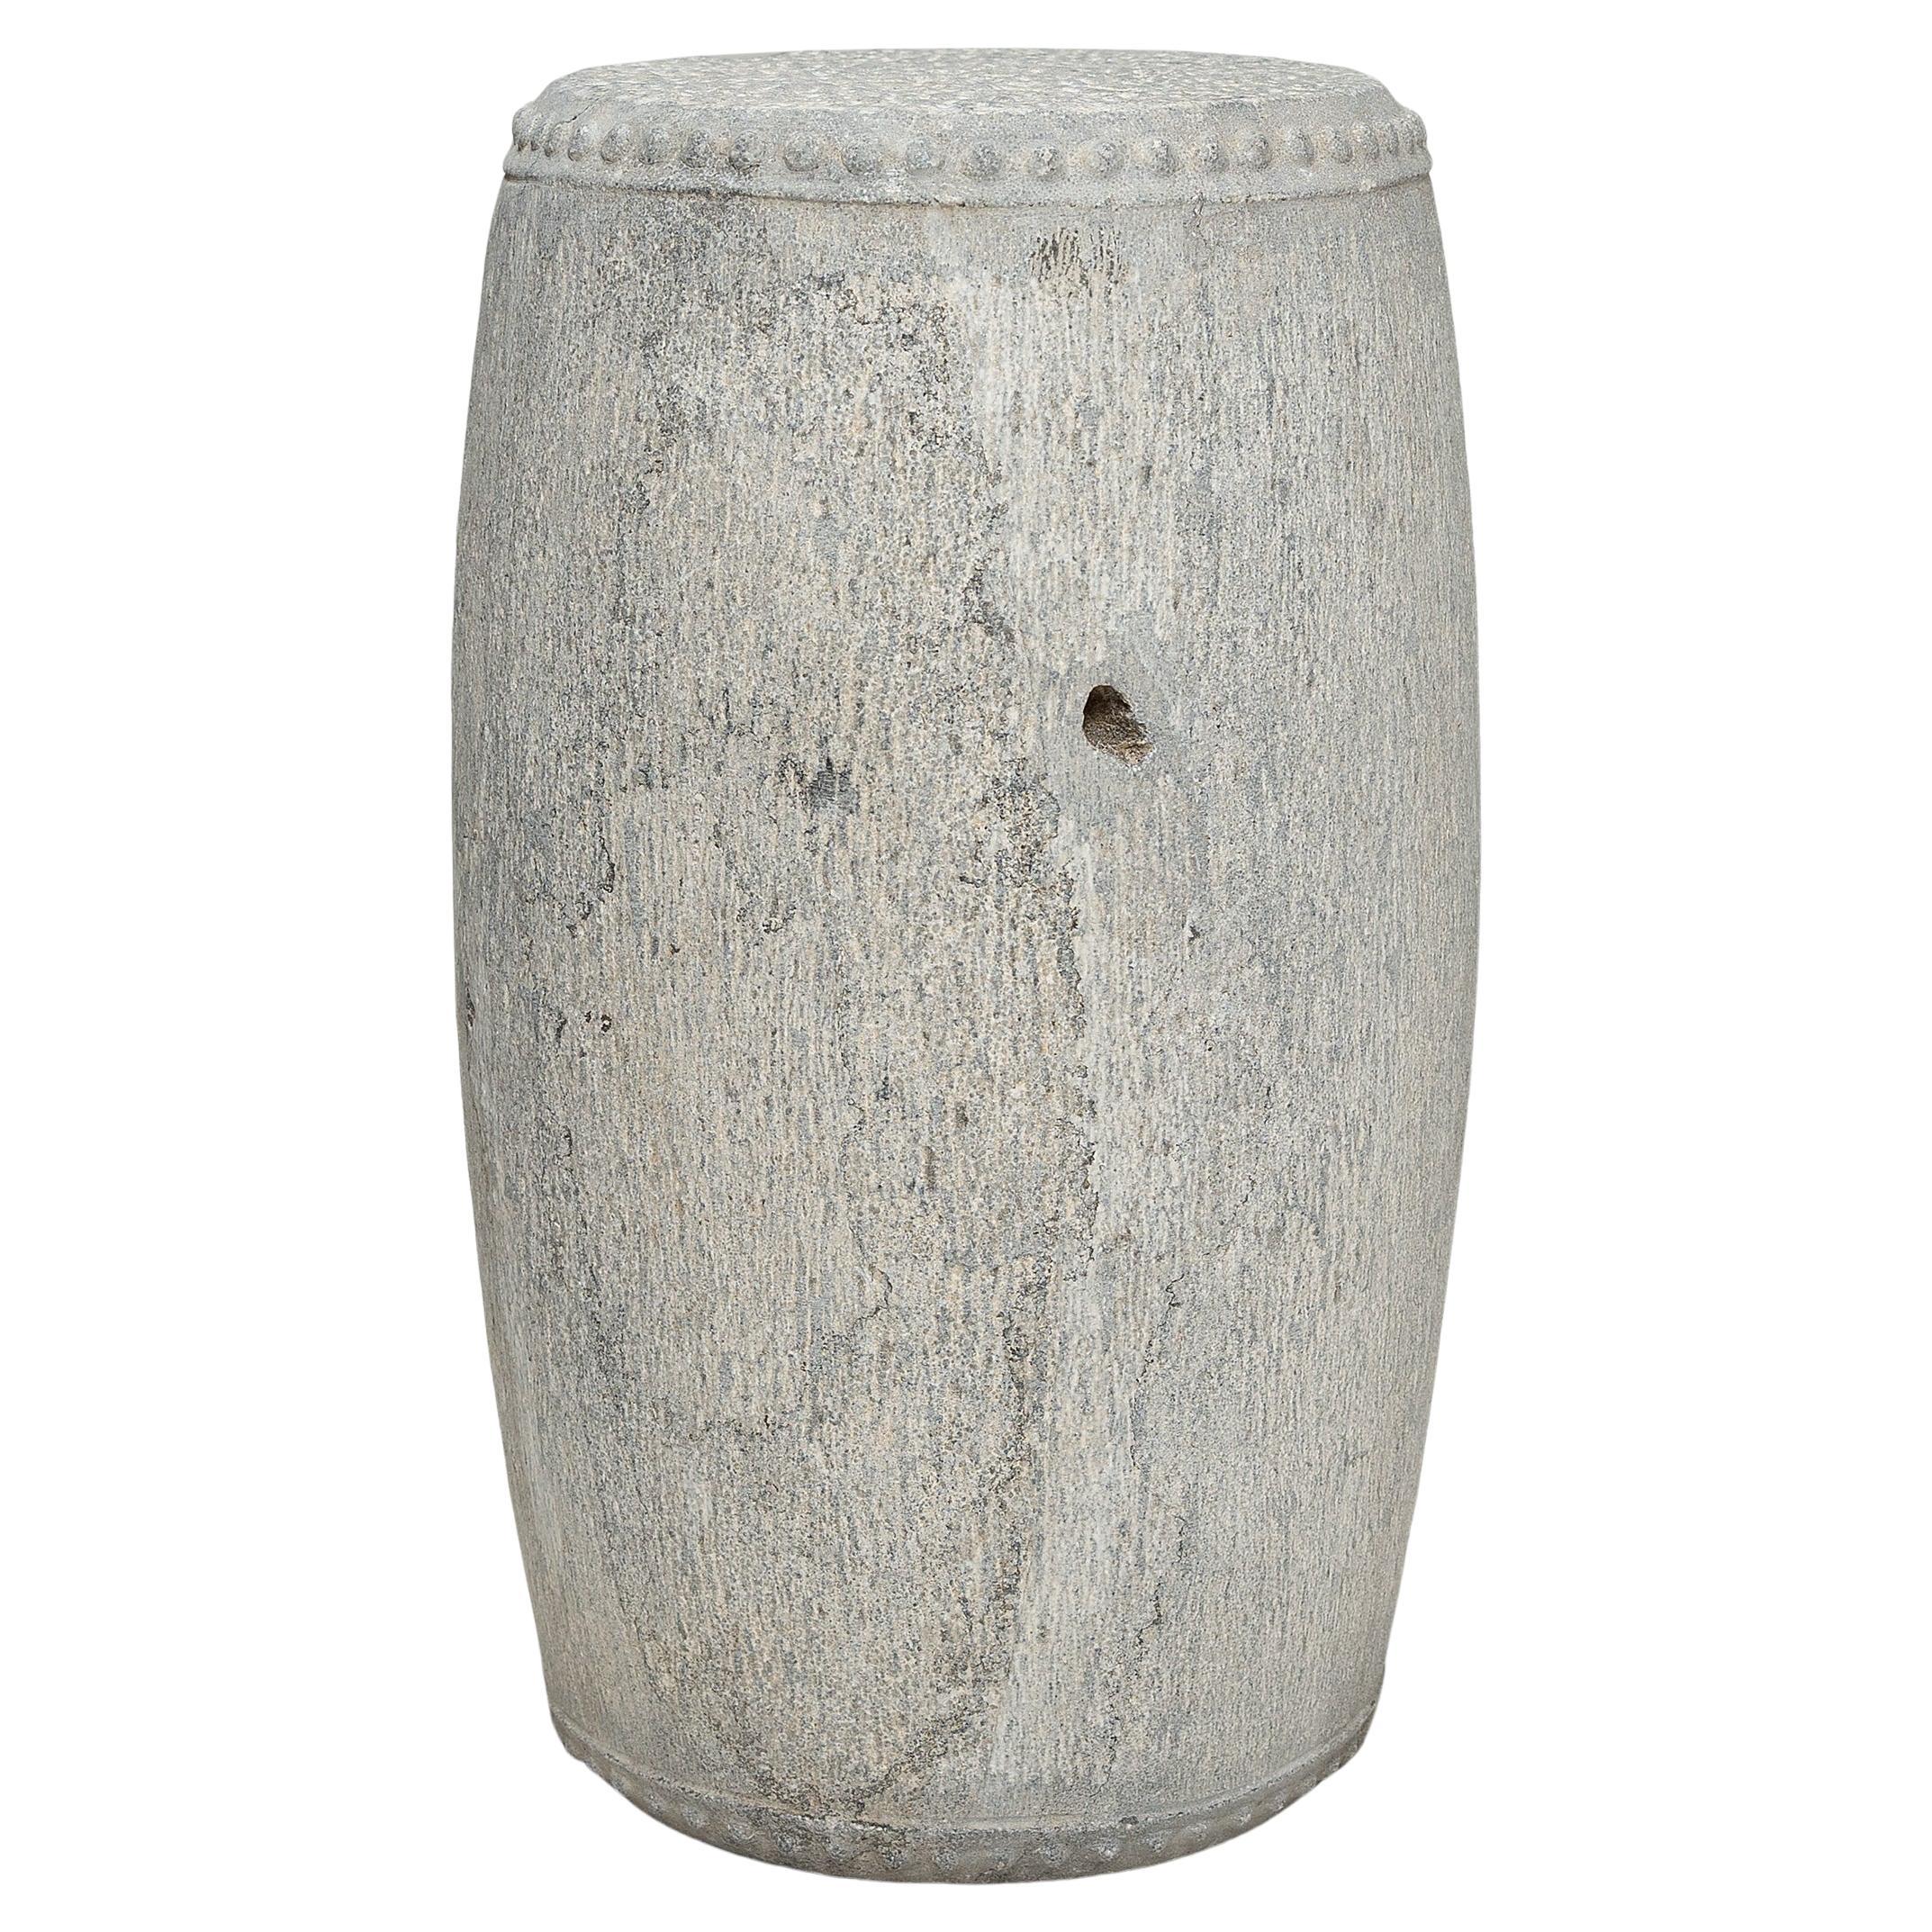 This slender stone drum stool was carved from a solid block of limestone with simple form and minimal decoration. The top and bottom are ringed with raised studs, a design meant to imitate the iron rivets that fasten stretched hide across a drum